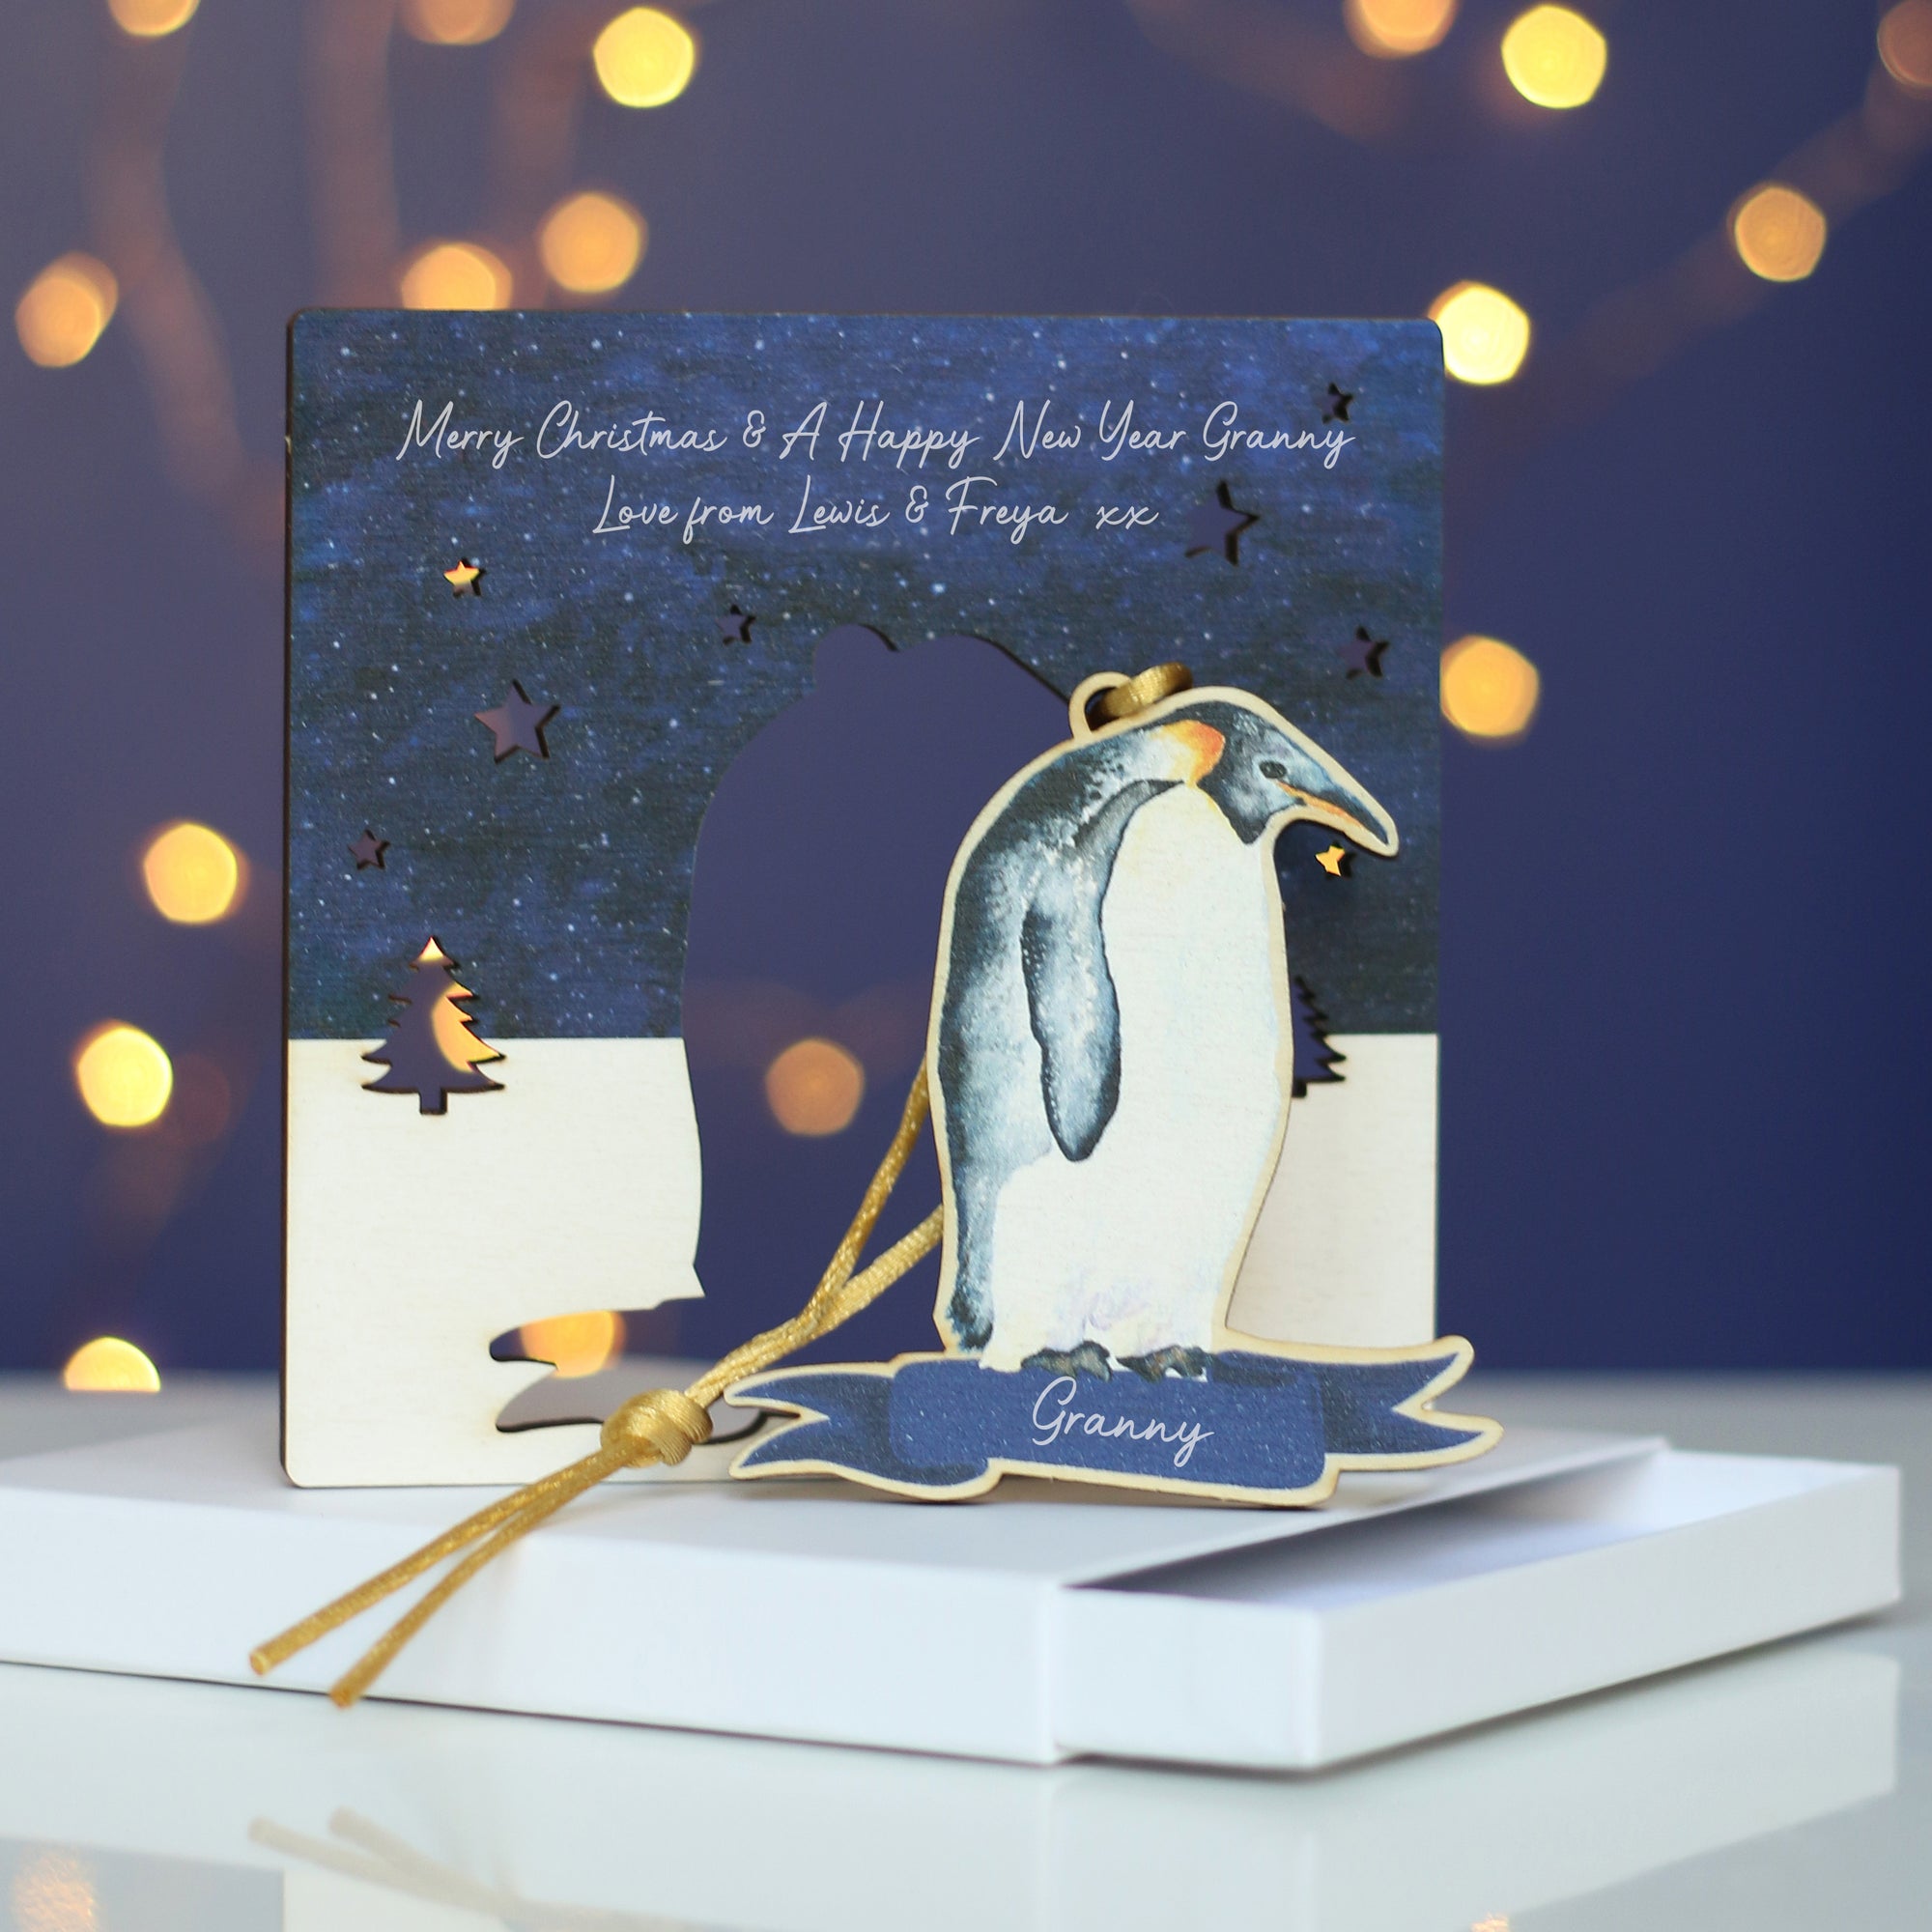 A wooden penguin decoration hangs from a branch. It is a watercolour of an Emperor penguin and has the name Granny at the bottom. In the background there's a blue wall and twinkly Christmas lights